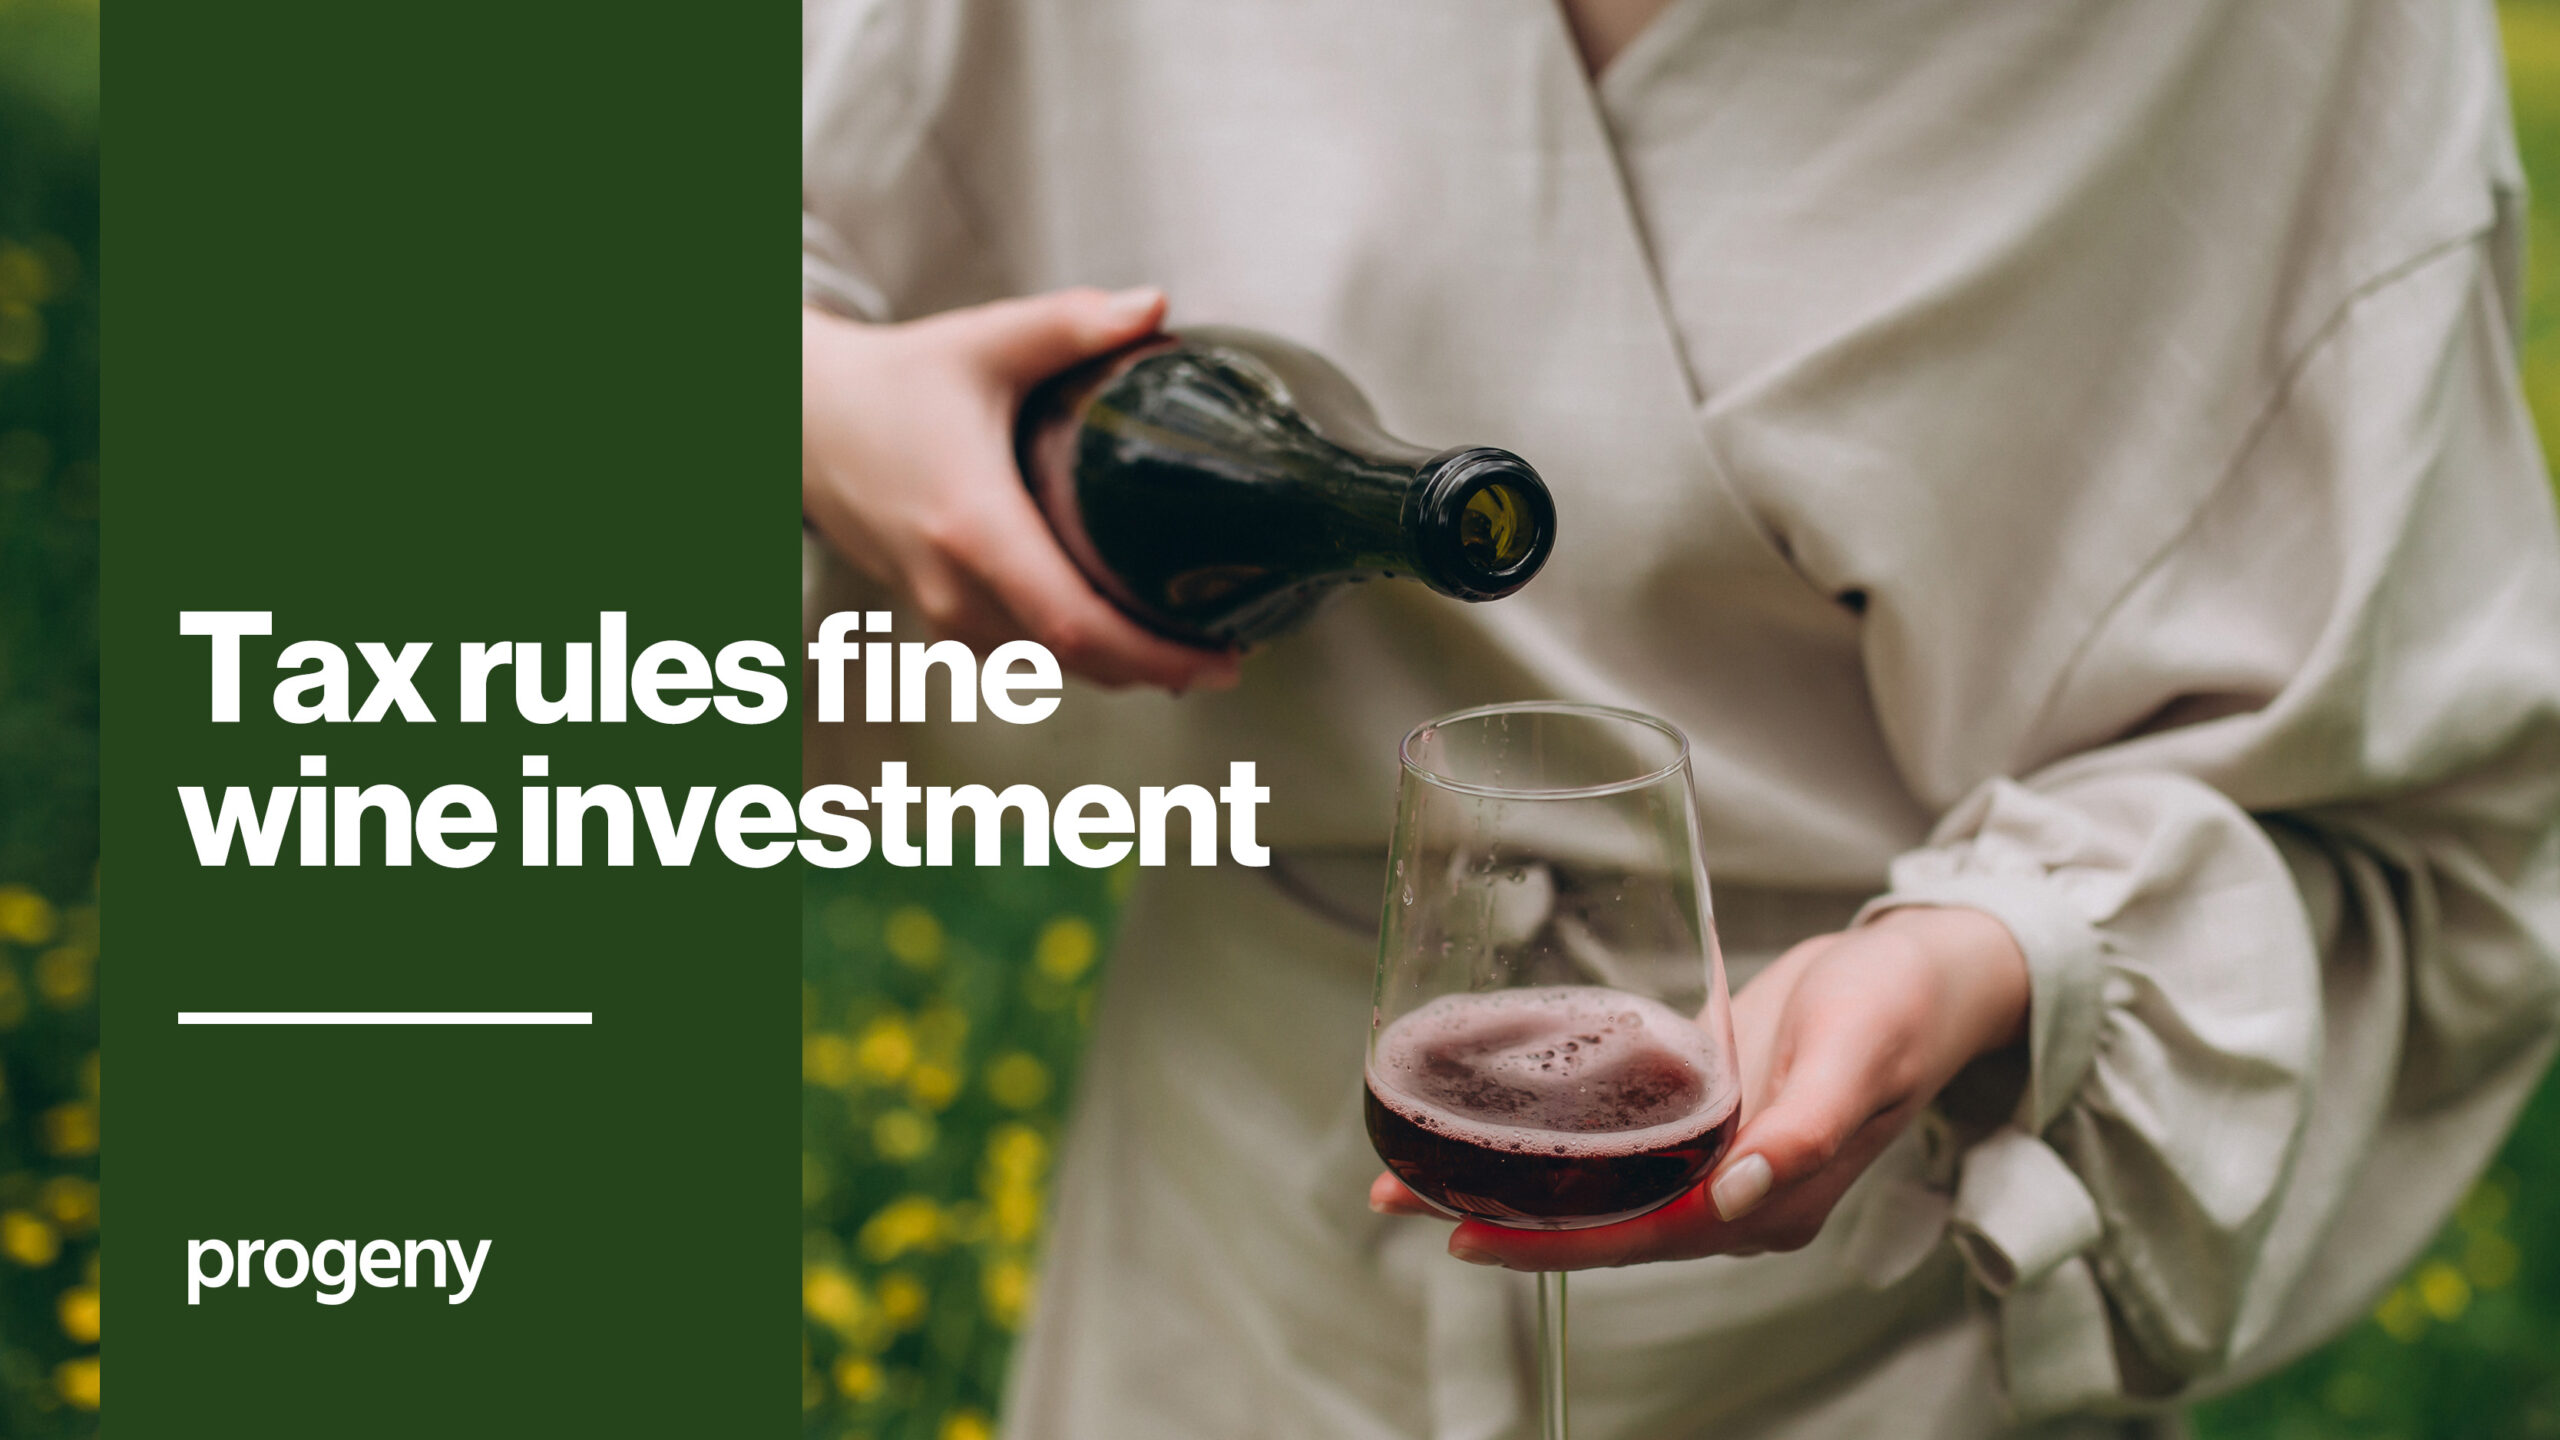 Tax rules fine wine investment